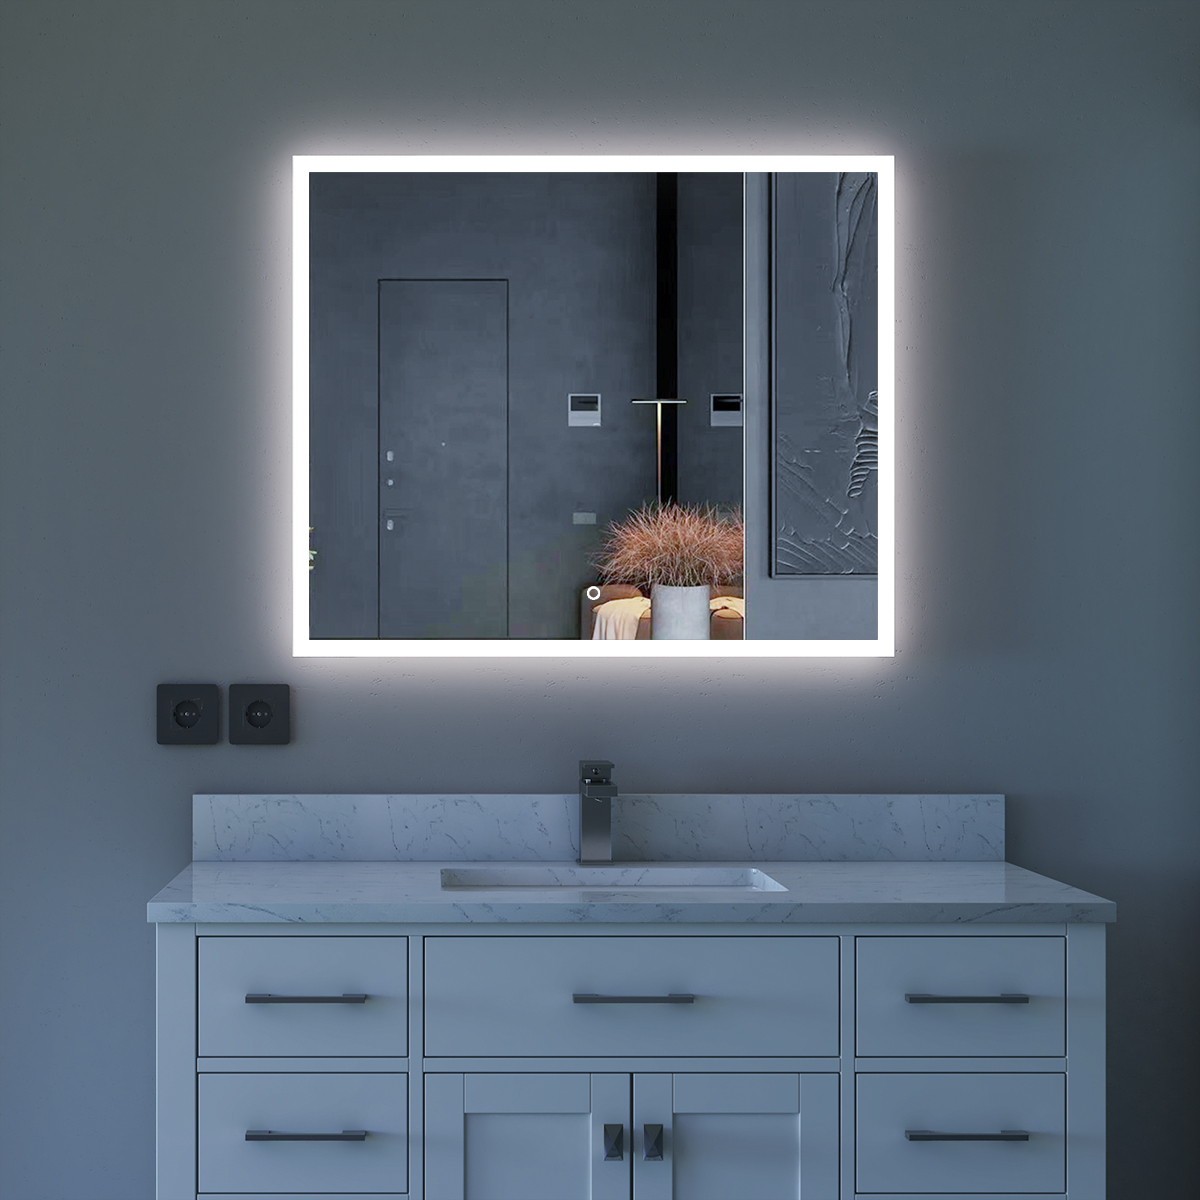 Duko MA033630T Wall Mounted Makeup LED Bathroom Vanity Mirror with Anti-Fog and Bluetooth Options